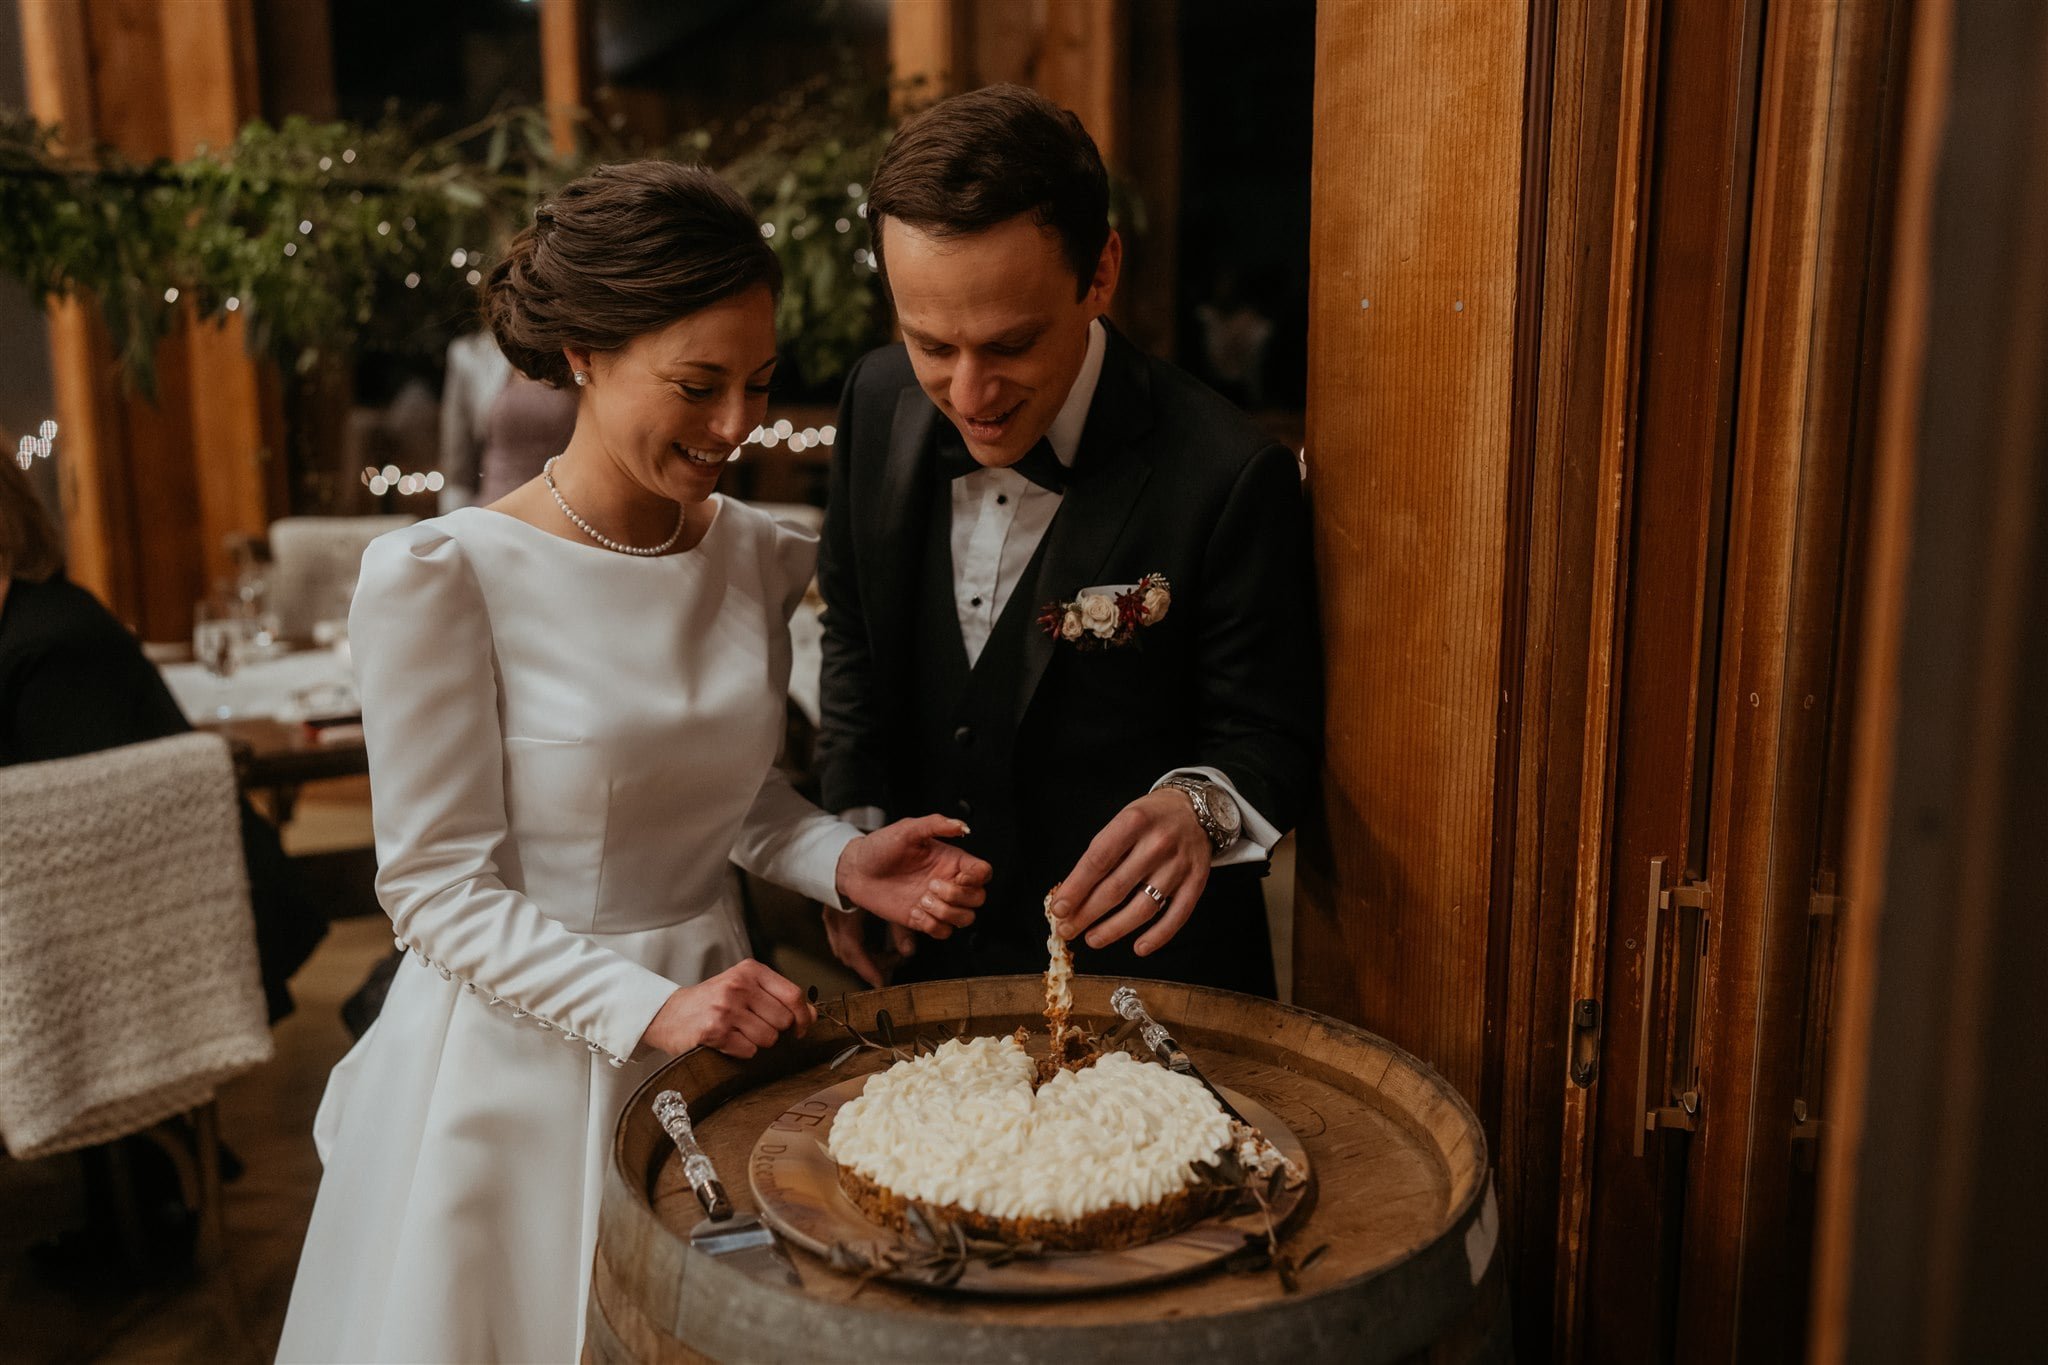 Bride and groom cut cake during winter wedding reception at Sequoia Retreat Center